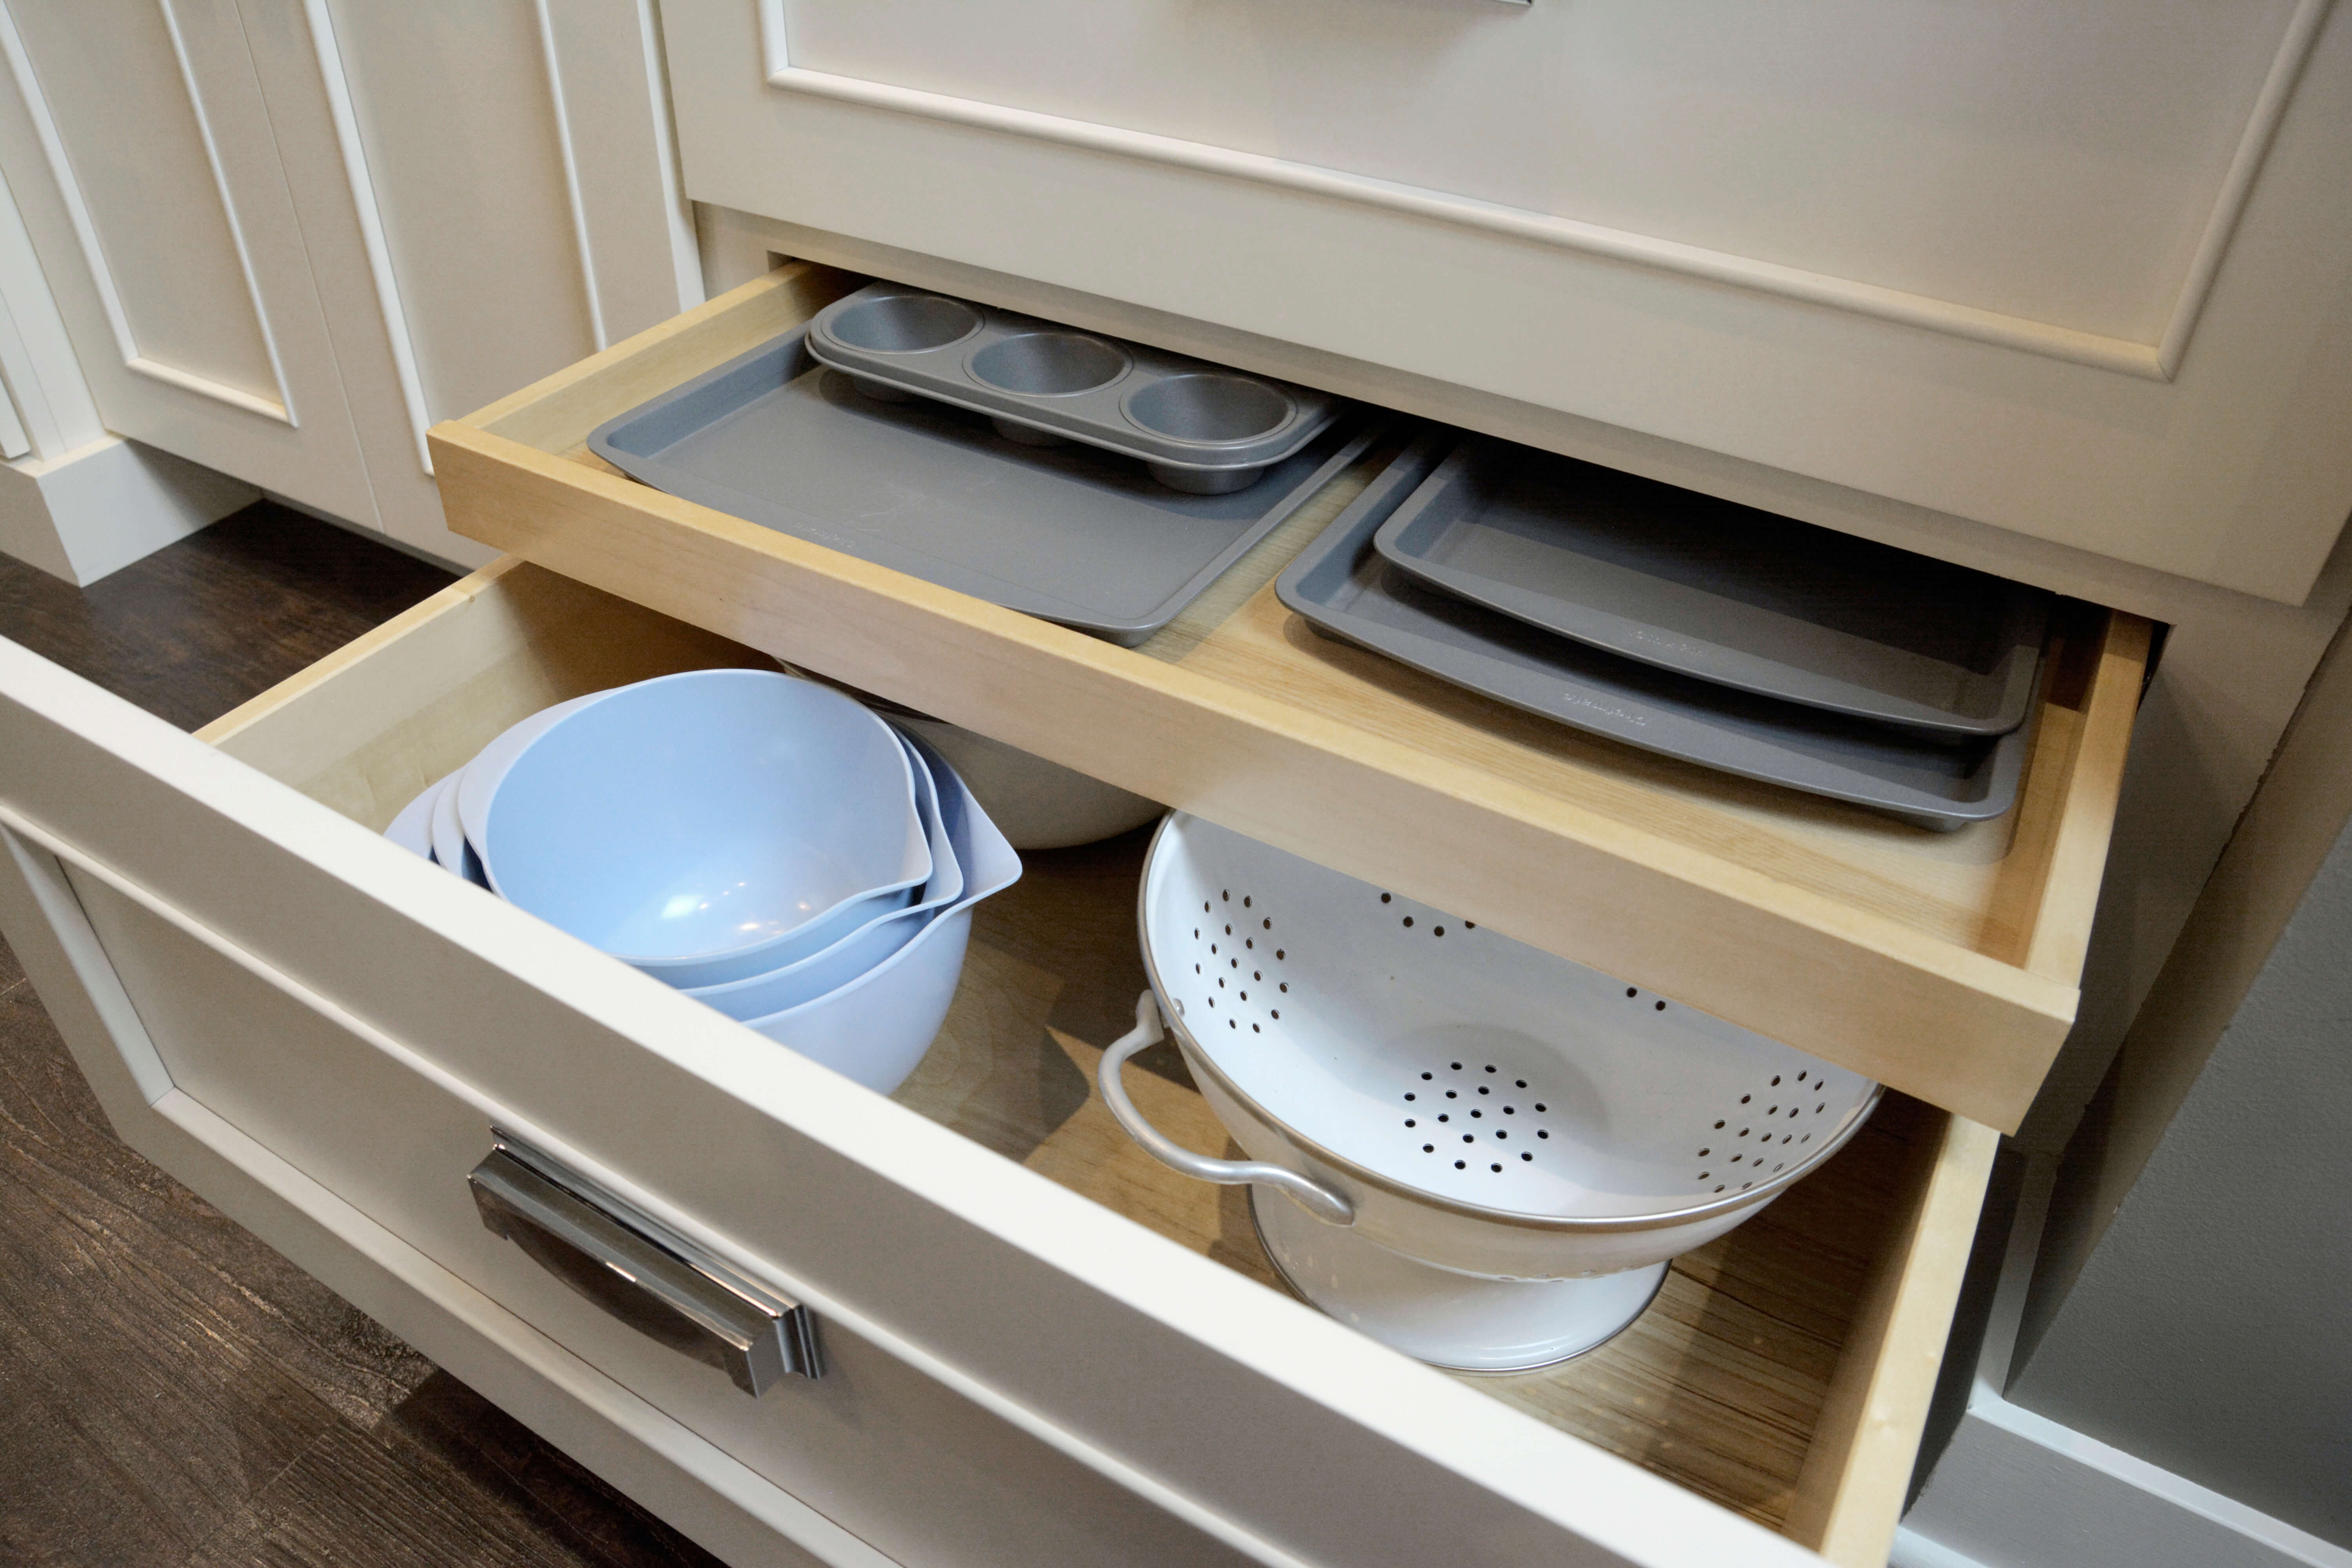 Pantry Oven Cabinet Tray Dividers on The Top Shelf